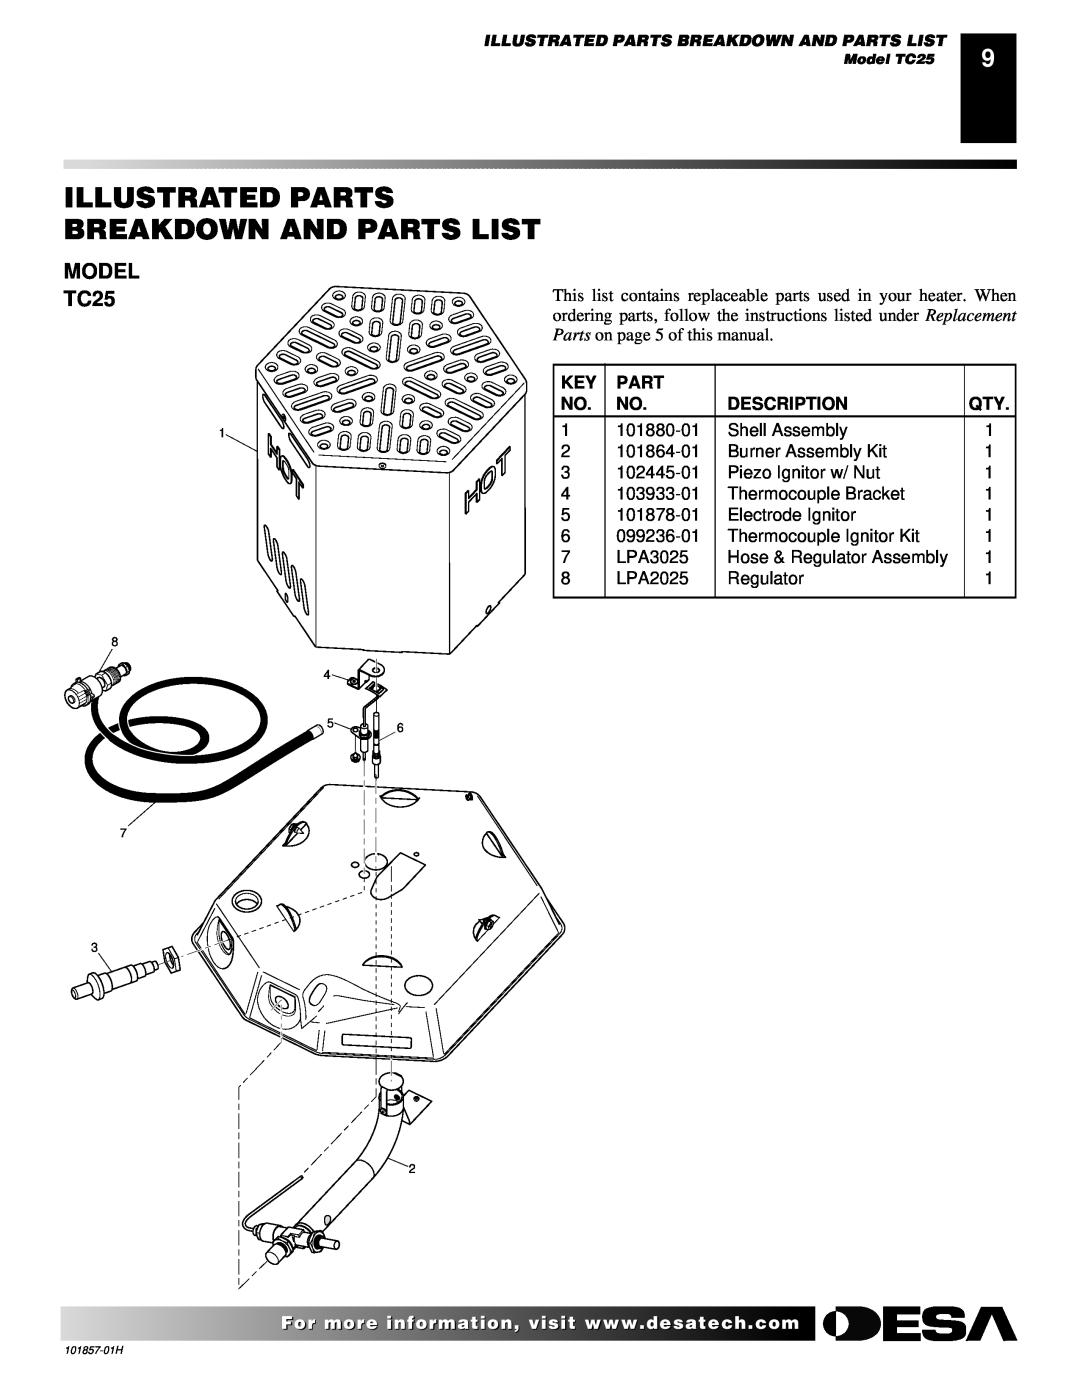 Desa owner manual Illustrated Parts Breakdown And Parts List, MODEL TC25 